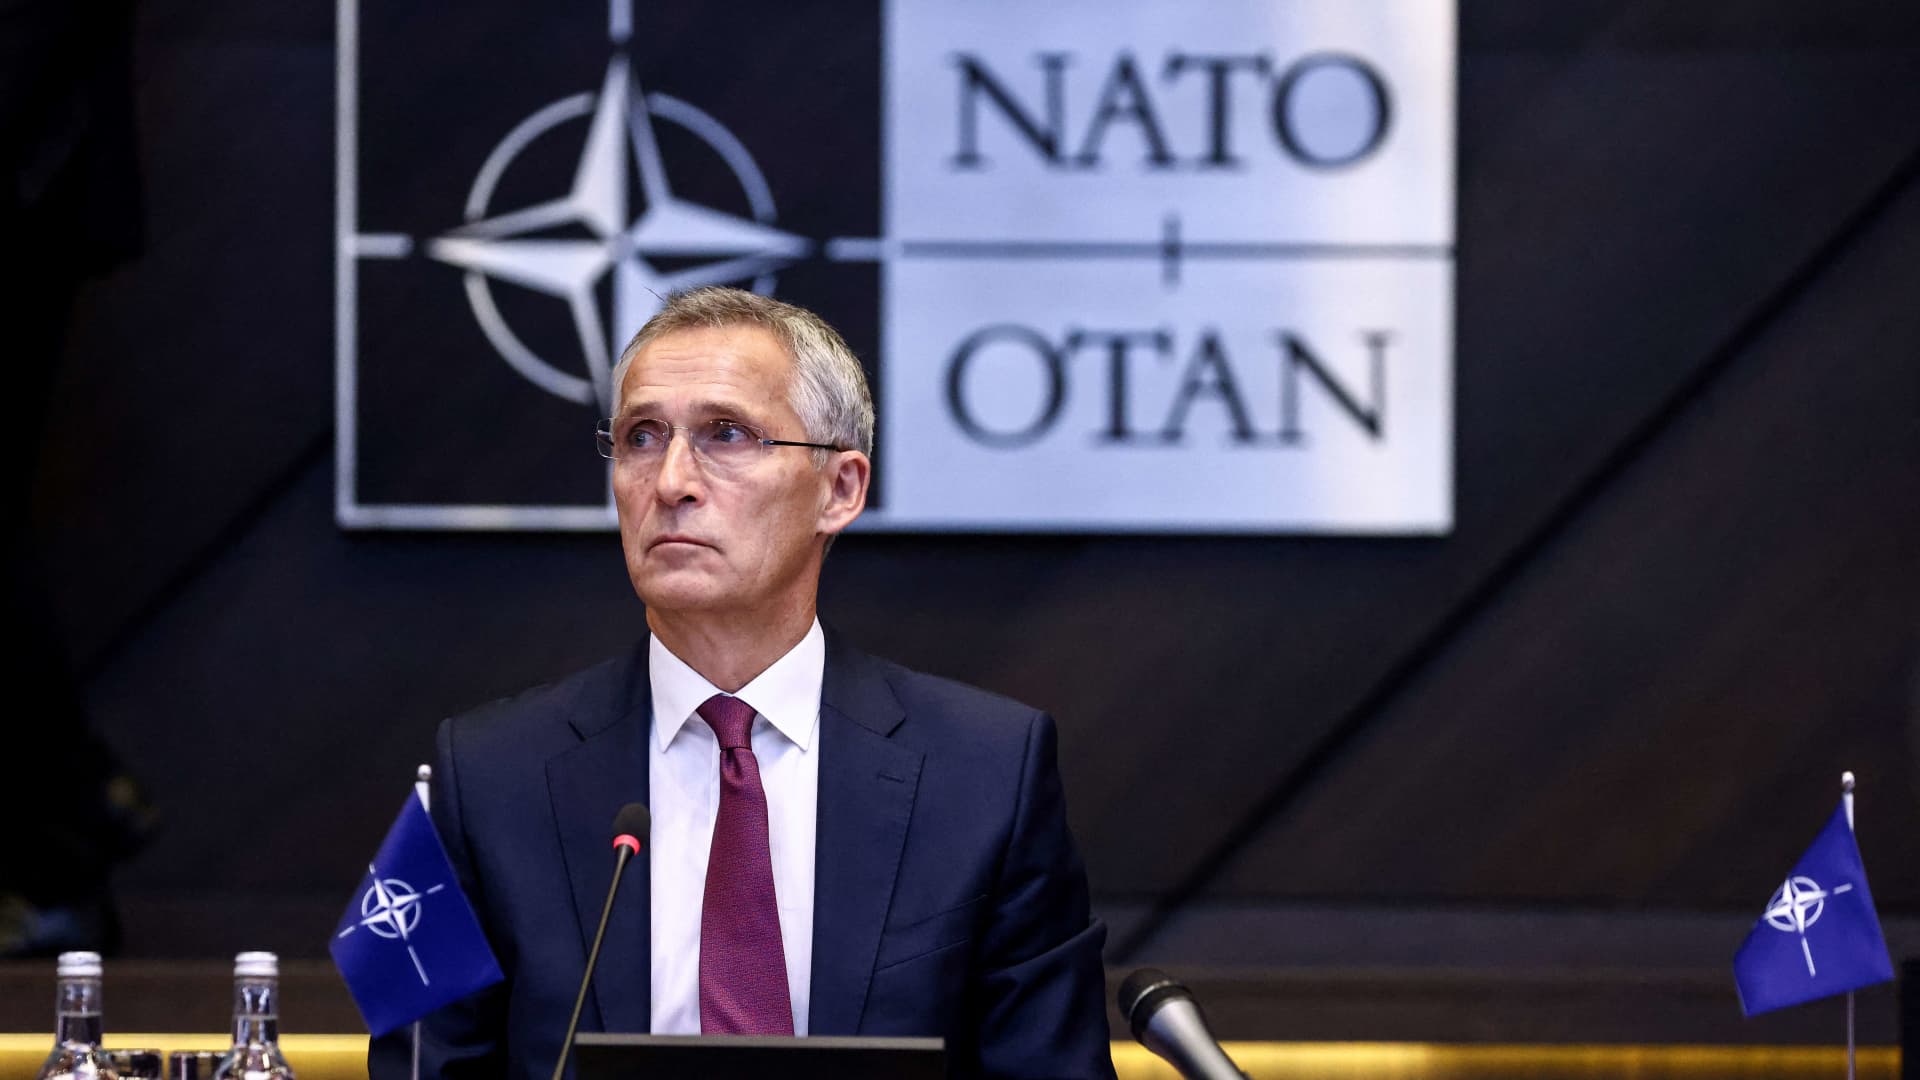 NATO Secretary-General Jens Stoltenberg said ministers would discuss increasing the military alliance's ammunition stockpile targets Tuesday, as well consider Ukrainian President Volodymyr Zelenskyy's calls for fighter jets.